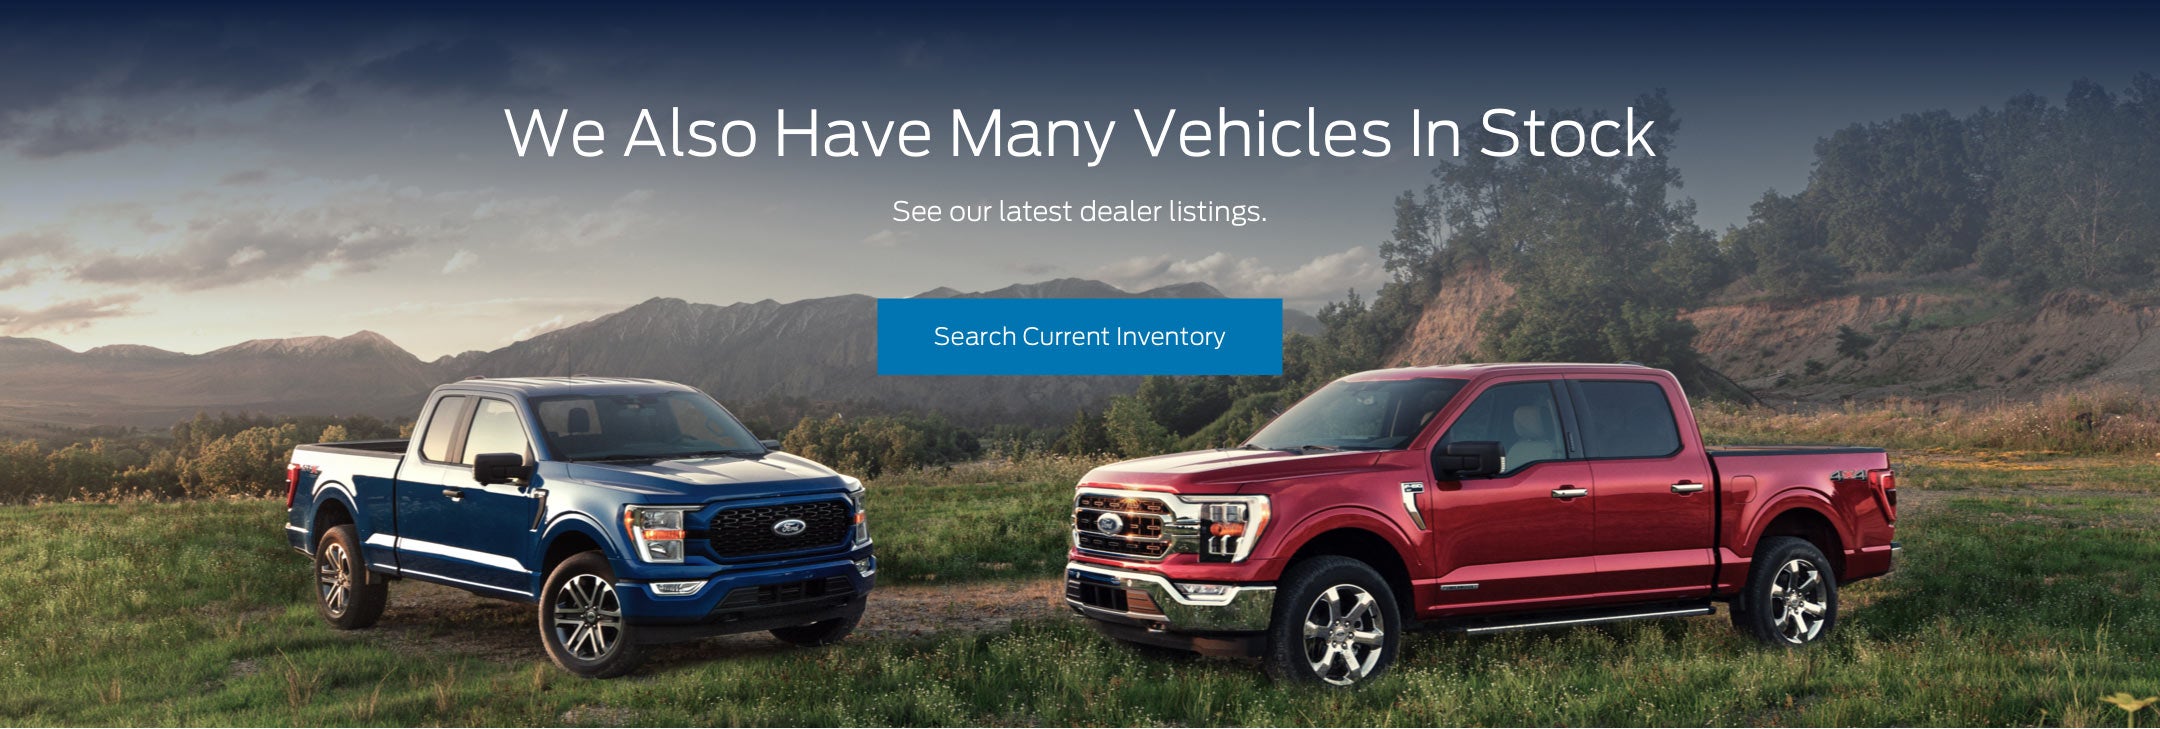 Ford vehicles in stock | Briarwood Ford in Saline MI